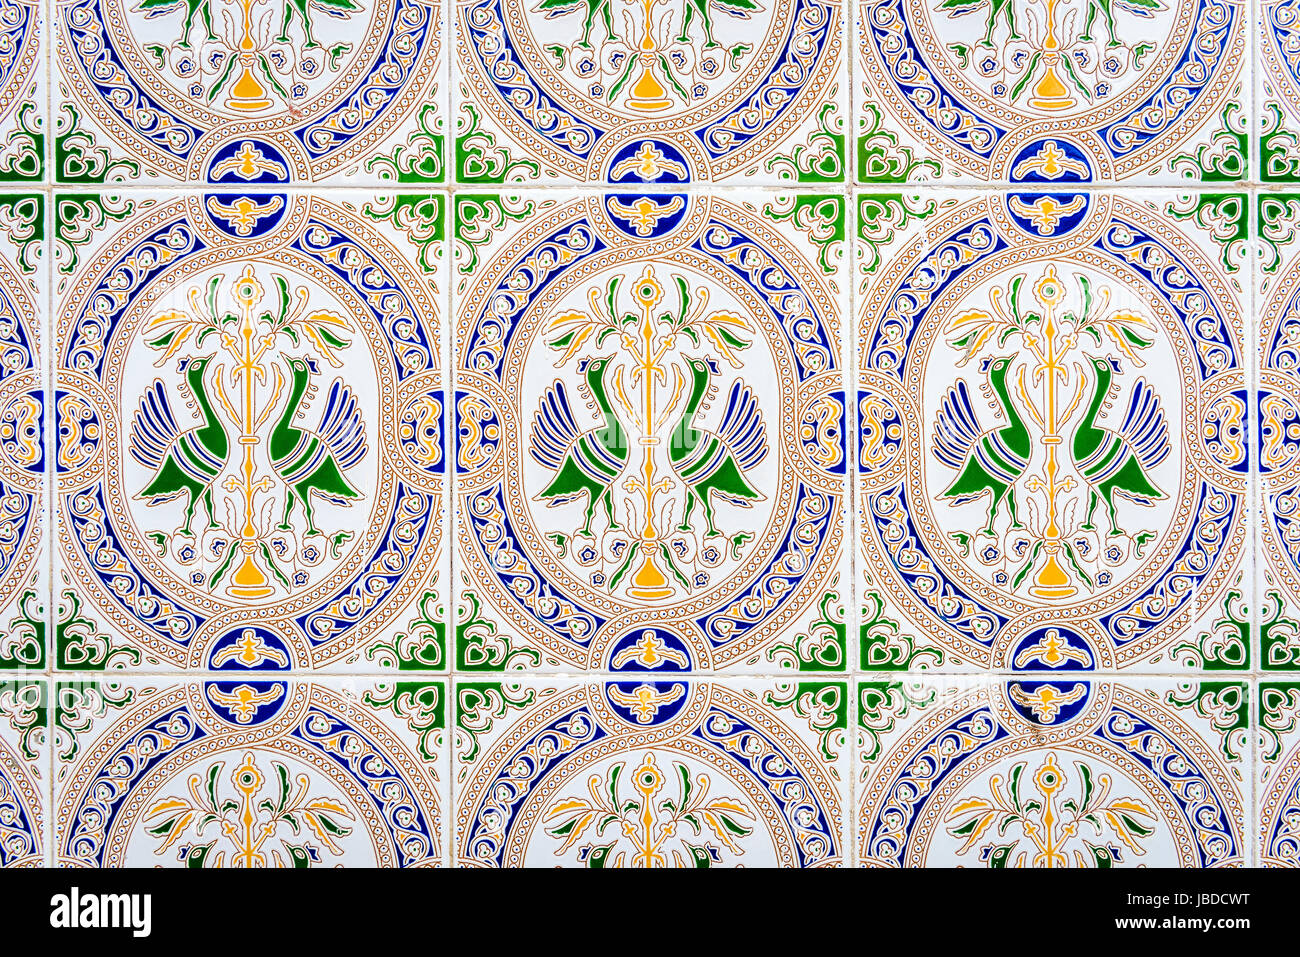 Ornate Tiled Wall Mosaics in Marbella, Andalusia, Spain, Europe Stock Photo